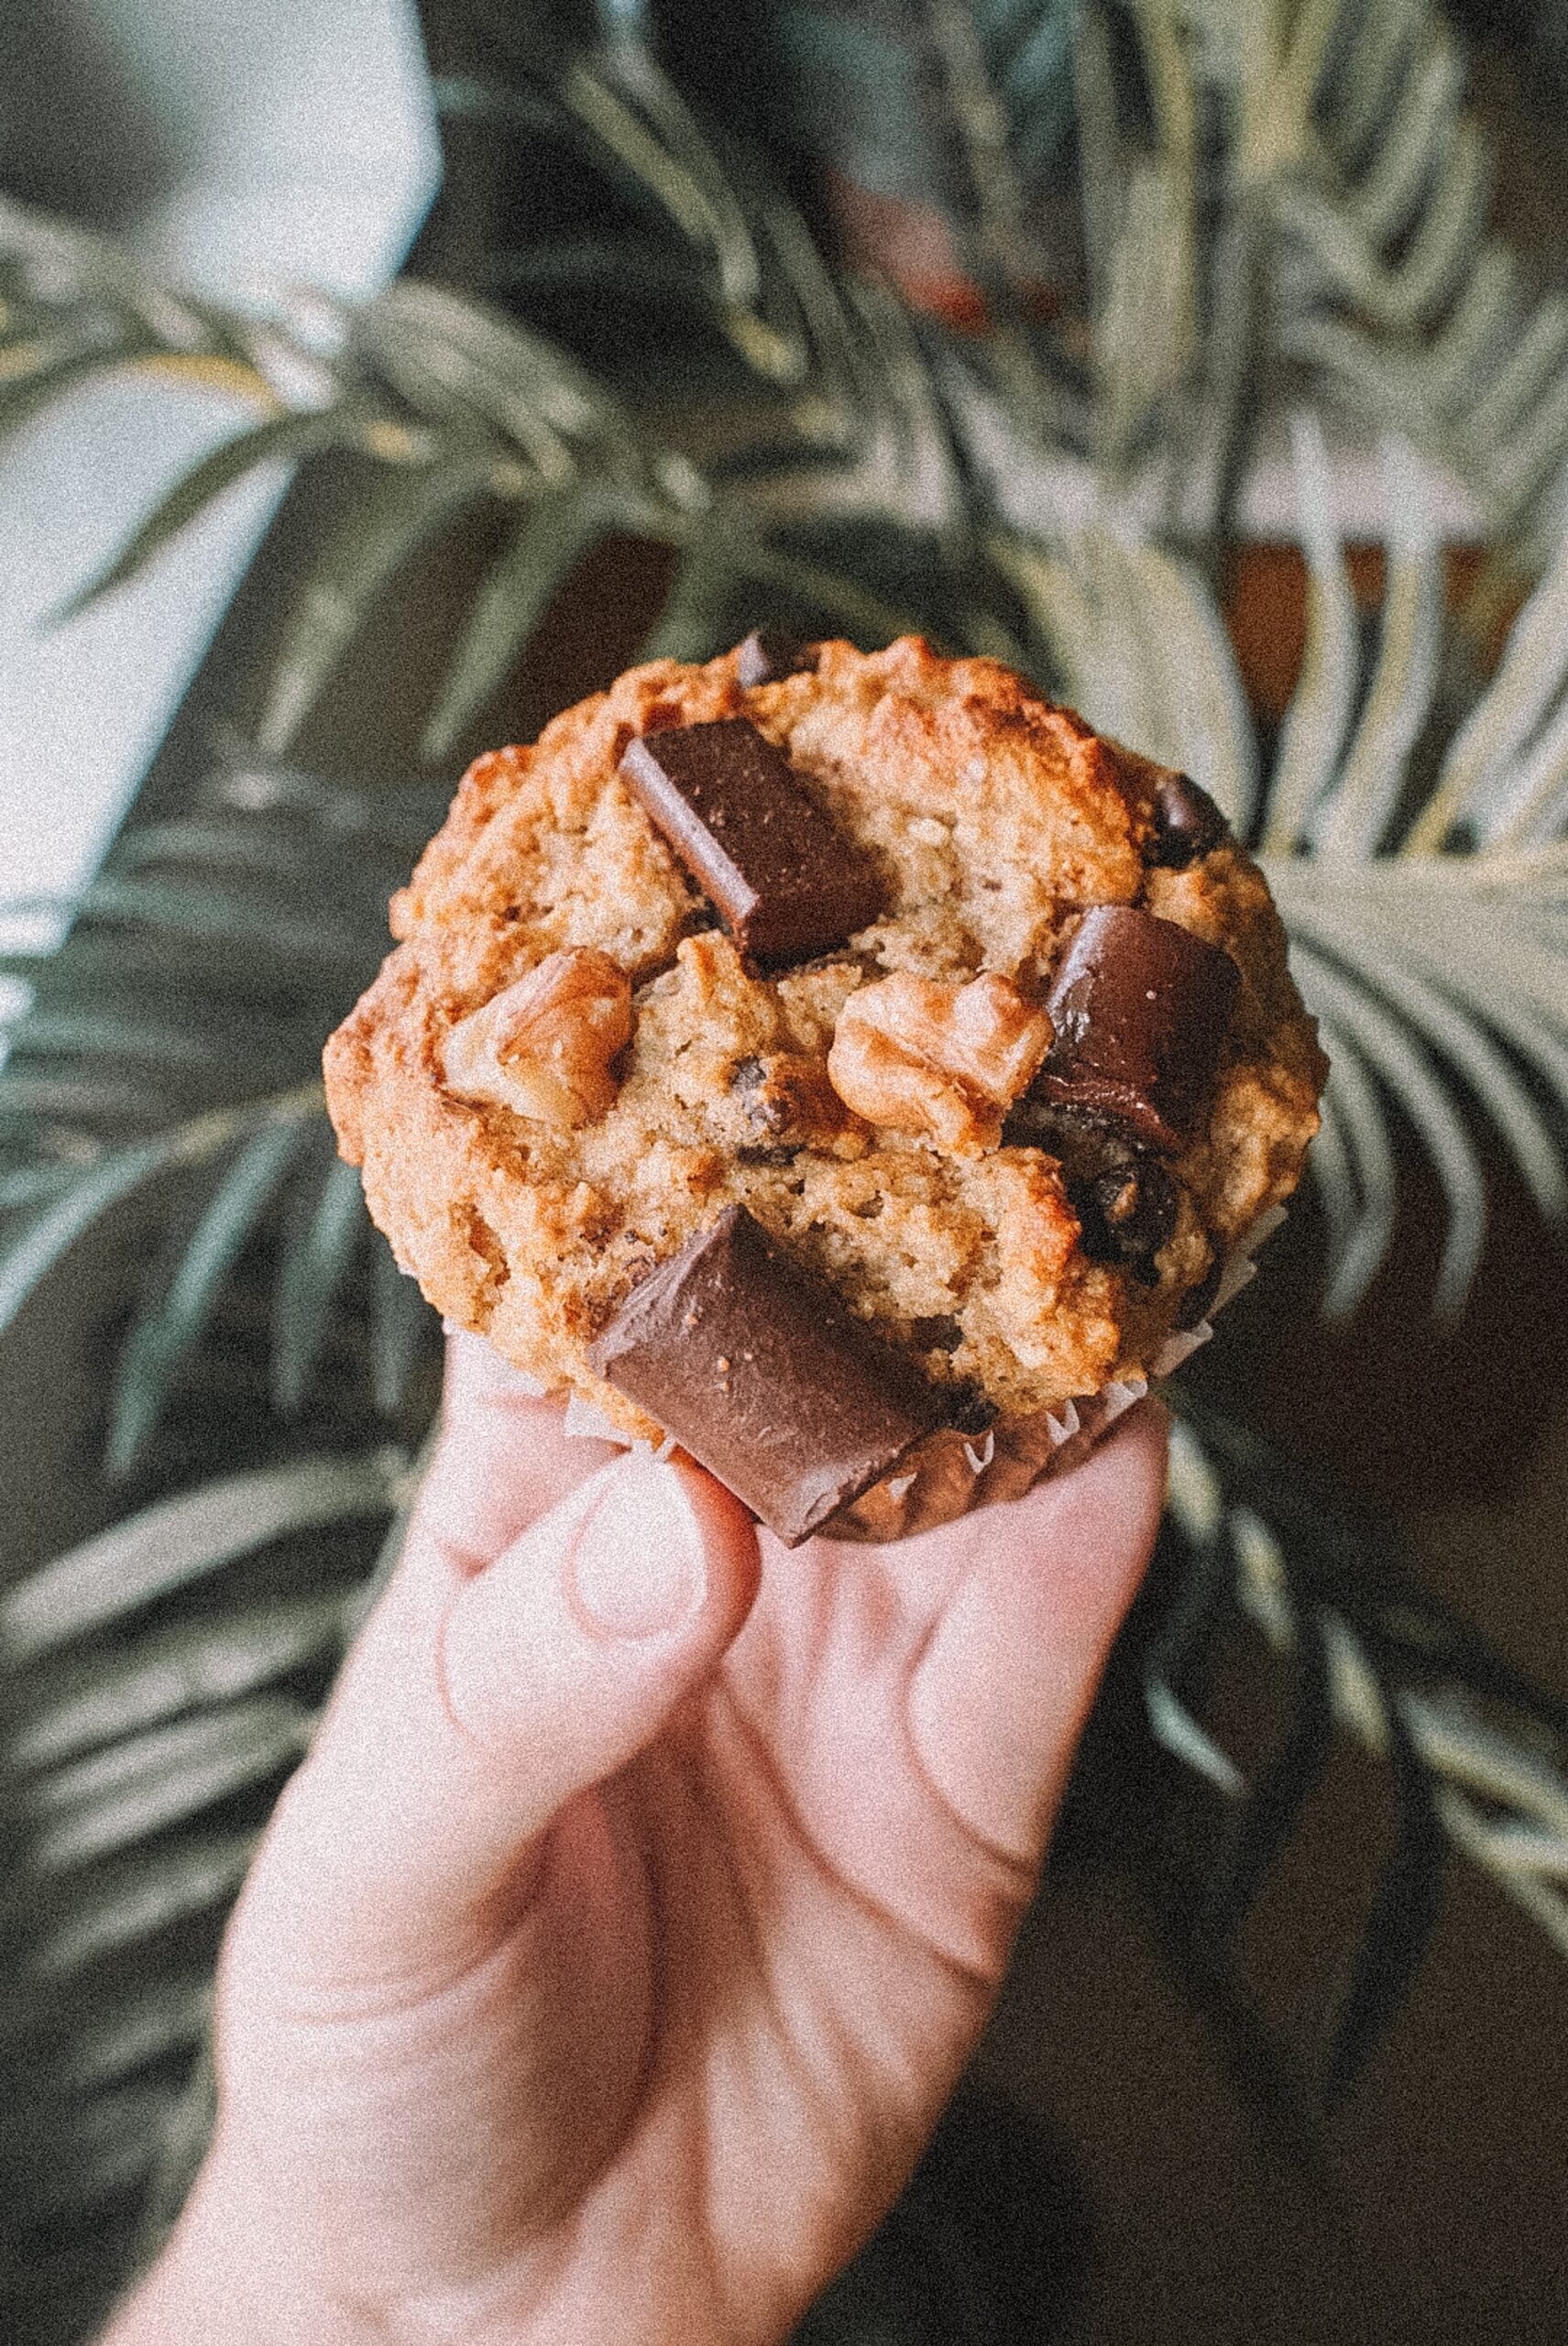 muffin with bananas, nuts and chocolate